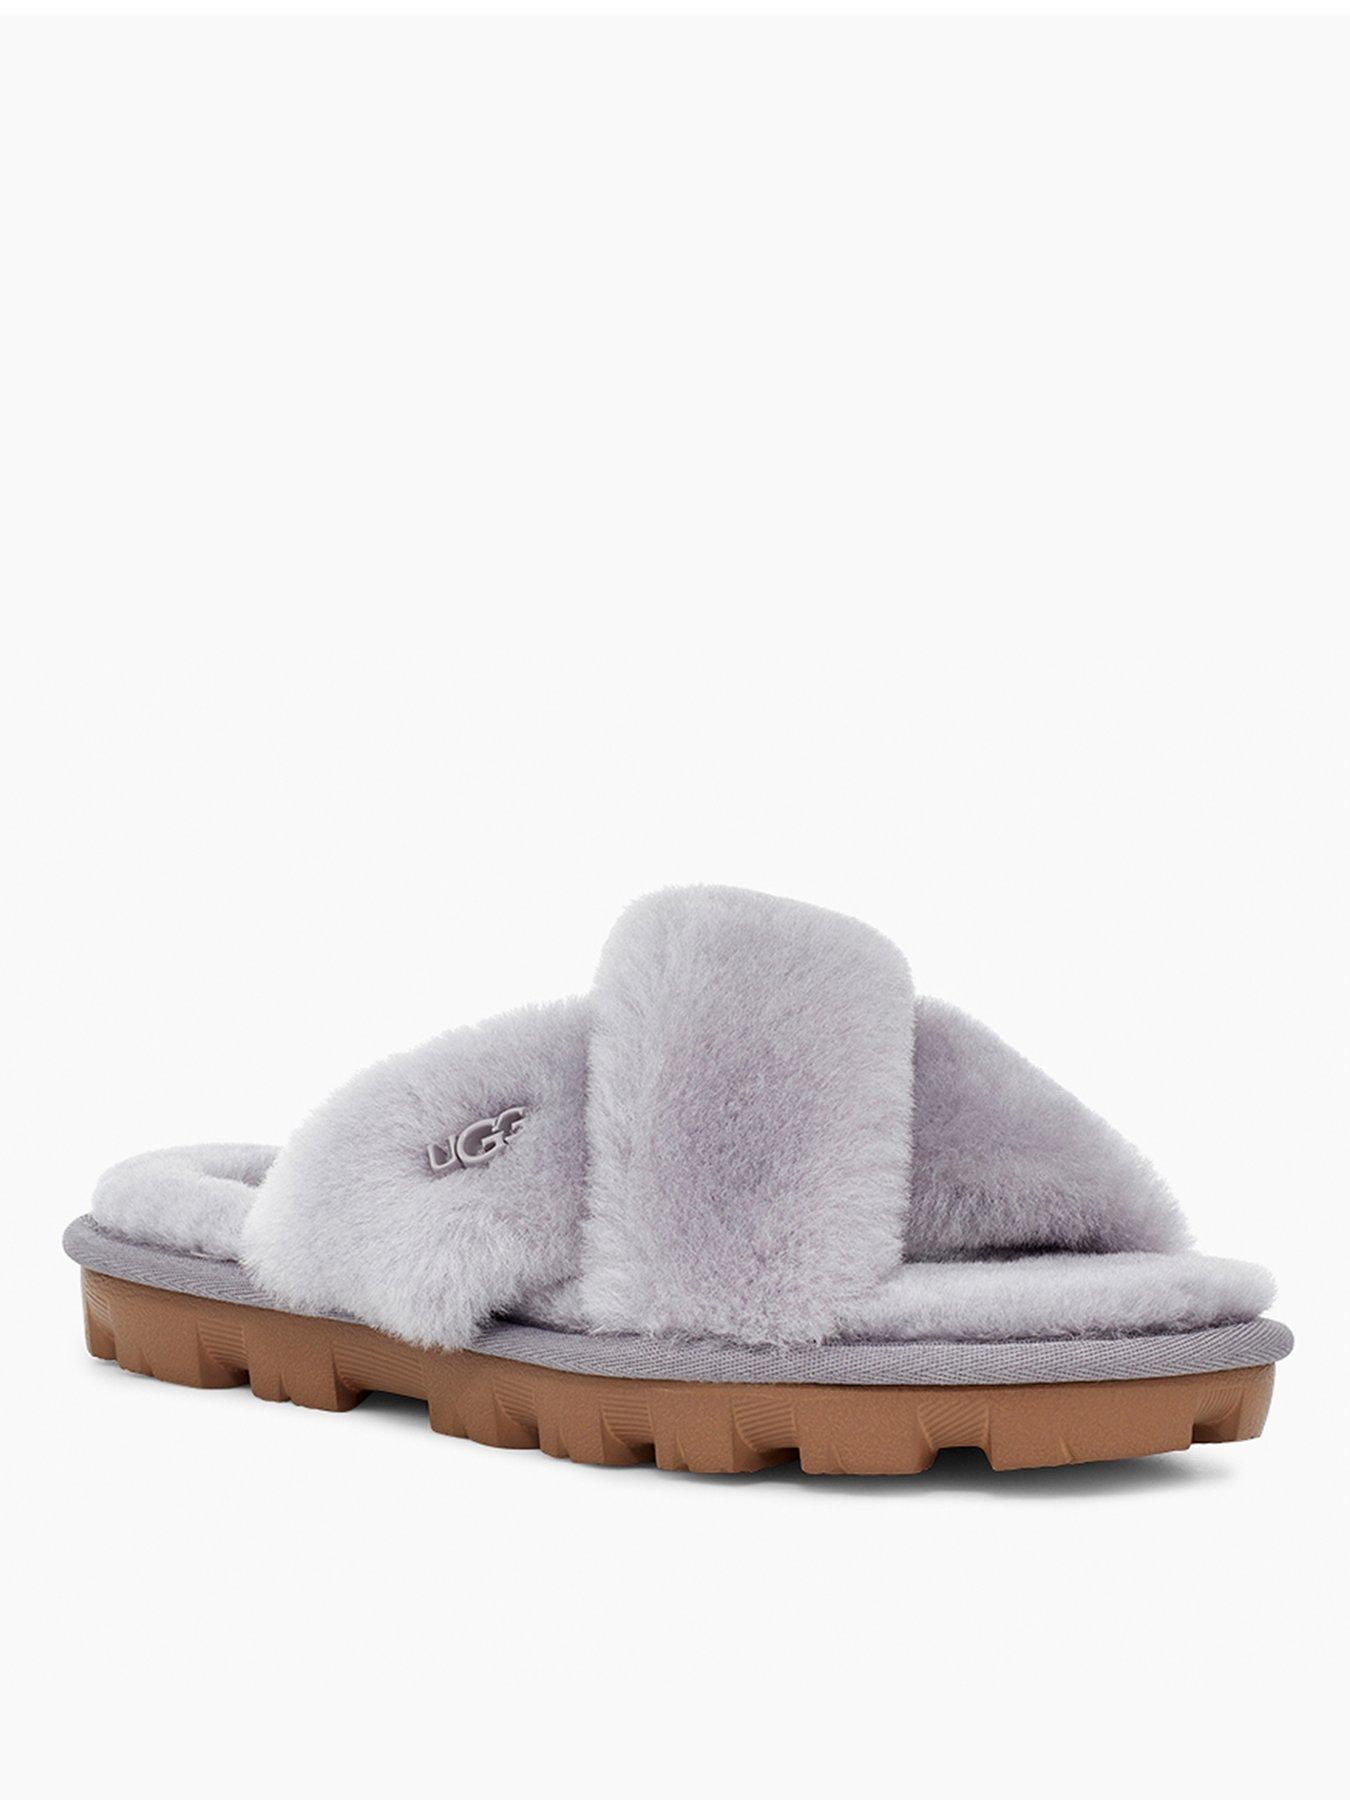 ugg boot style slippers